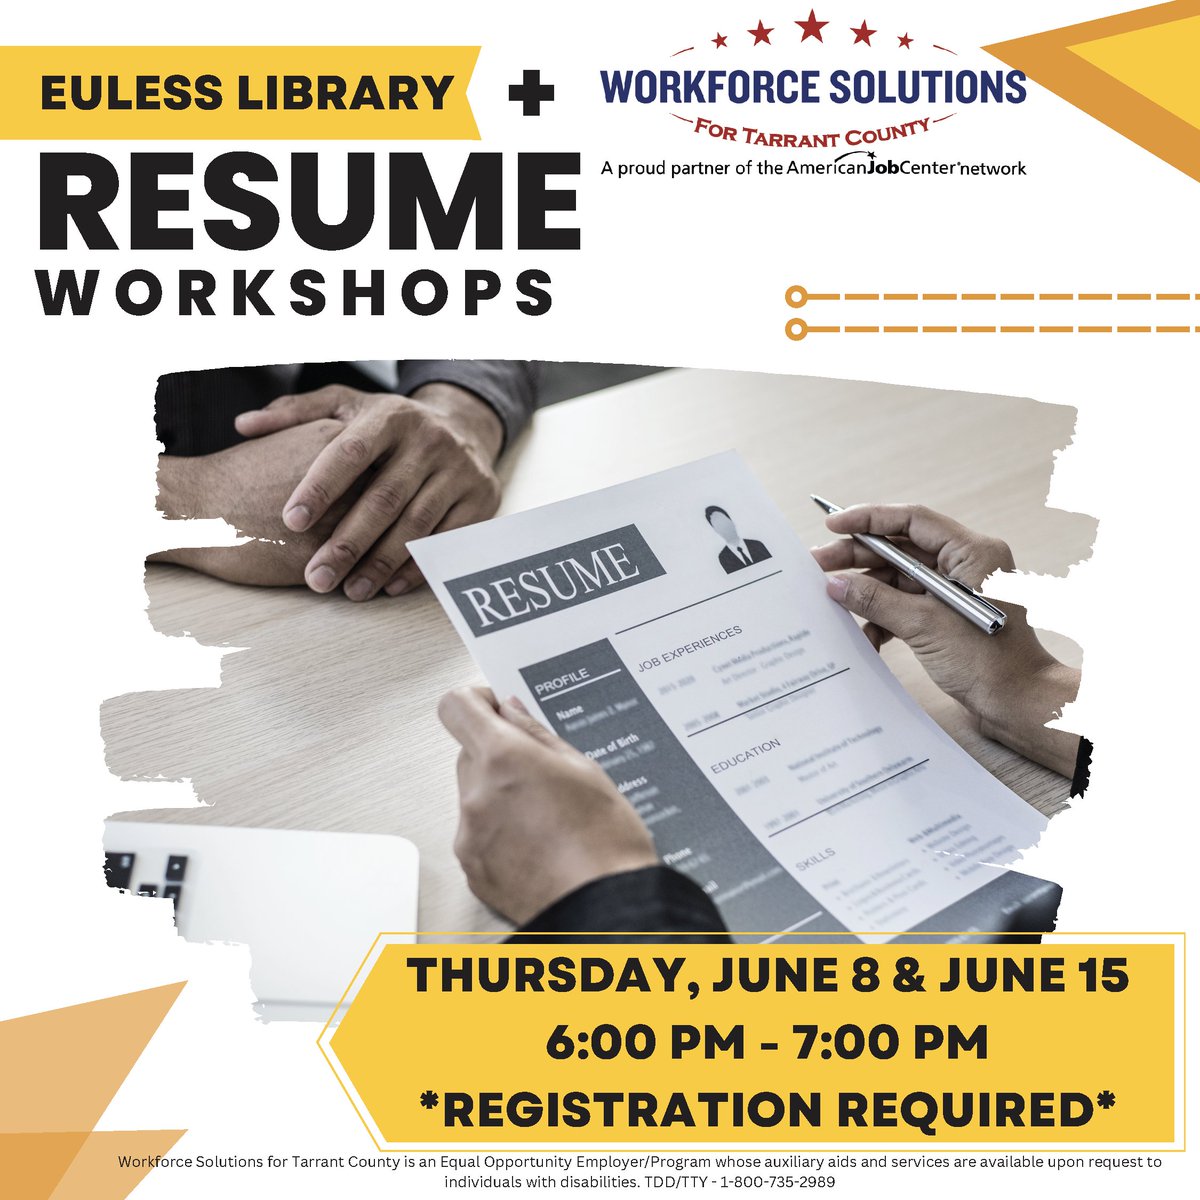 #wstc is proud to partner with the @EulessLibrary to bring you a #resume workshop. Check out the details below 👇 
📅  June 15th
⏰ 6:00 p.m. to 7:00 p.m. 
🌐 Registration is required, so head to the library calendar (eulesslibrary.librarycalendar.com) to sign up!